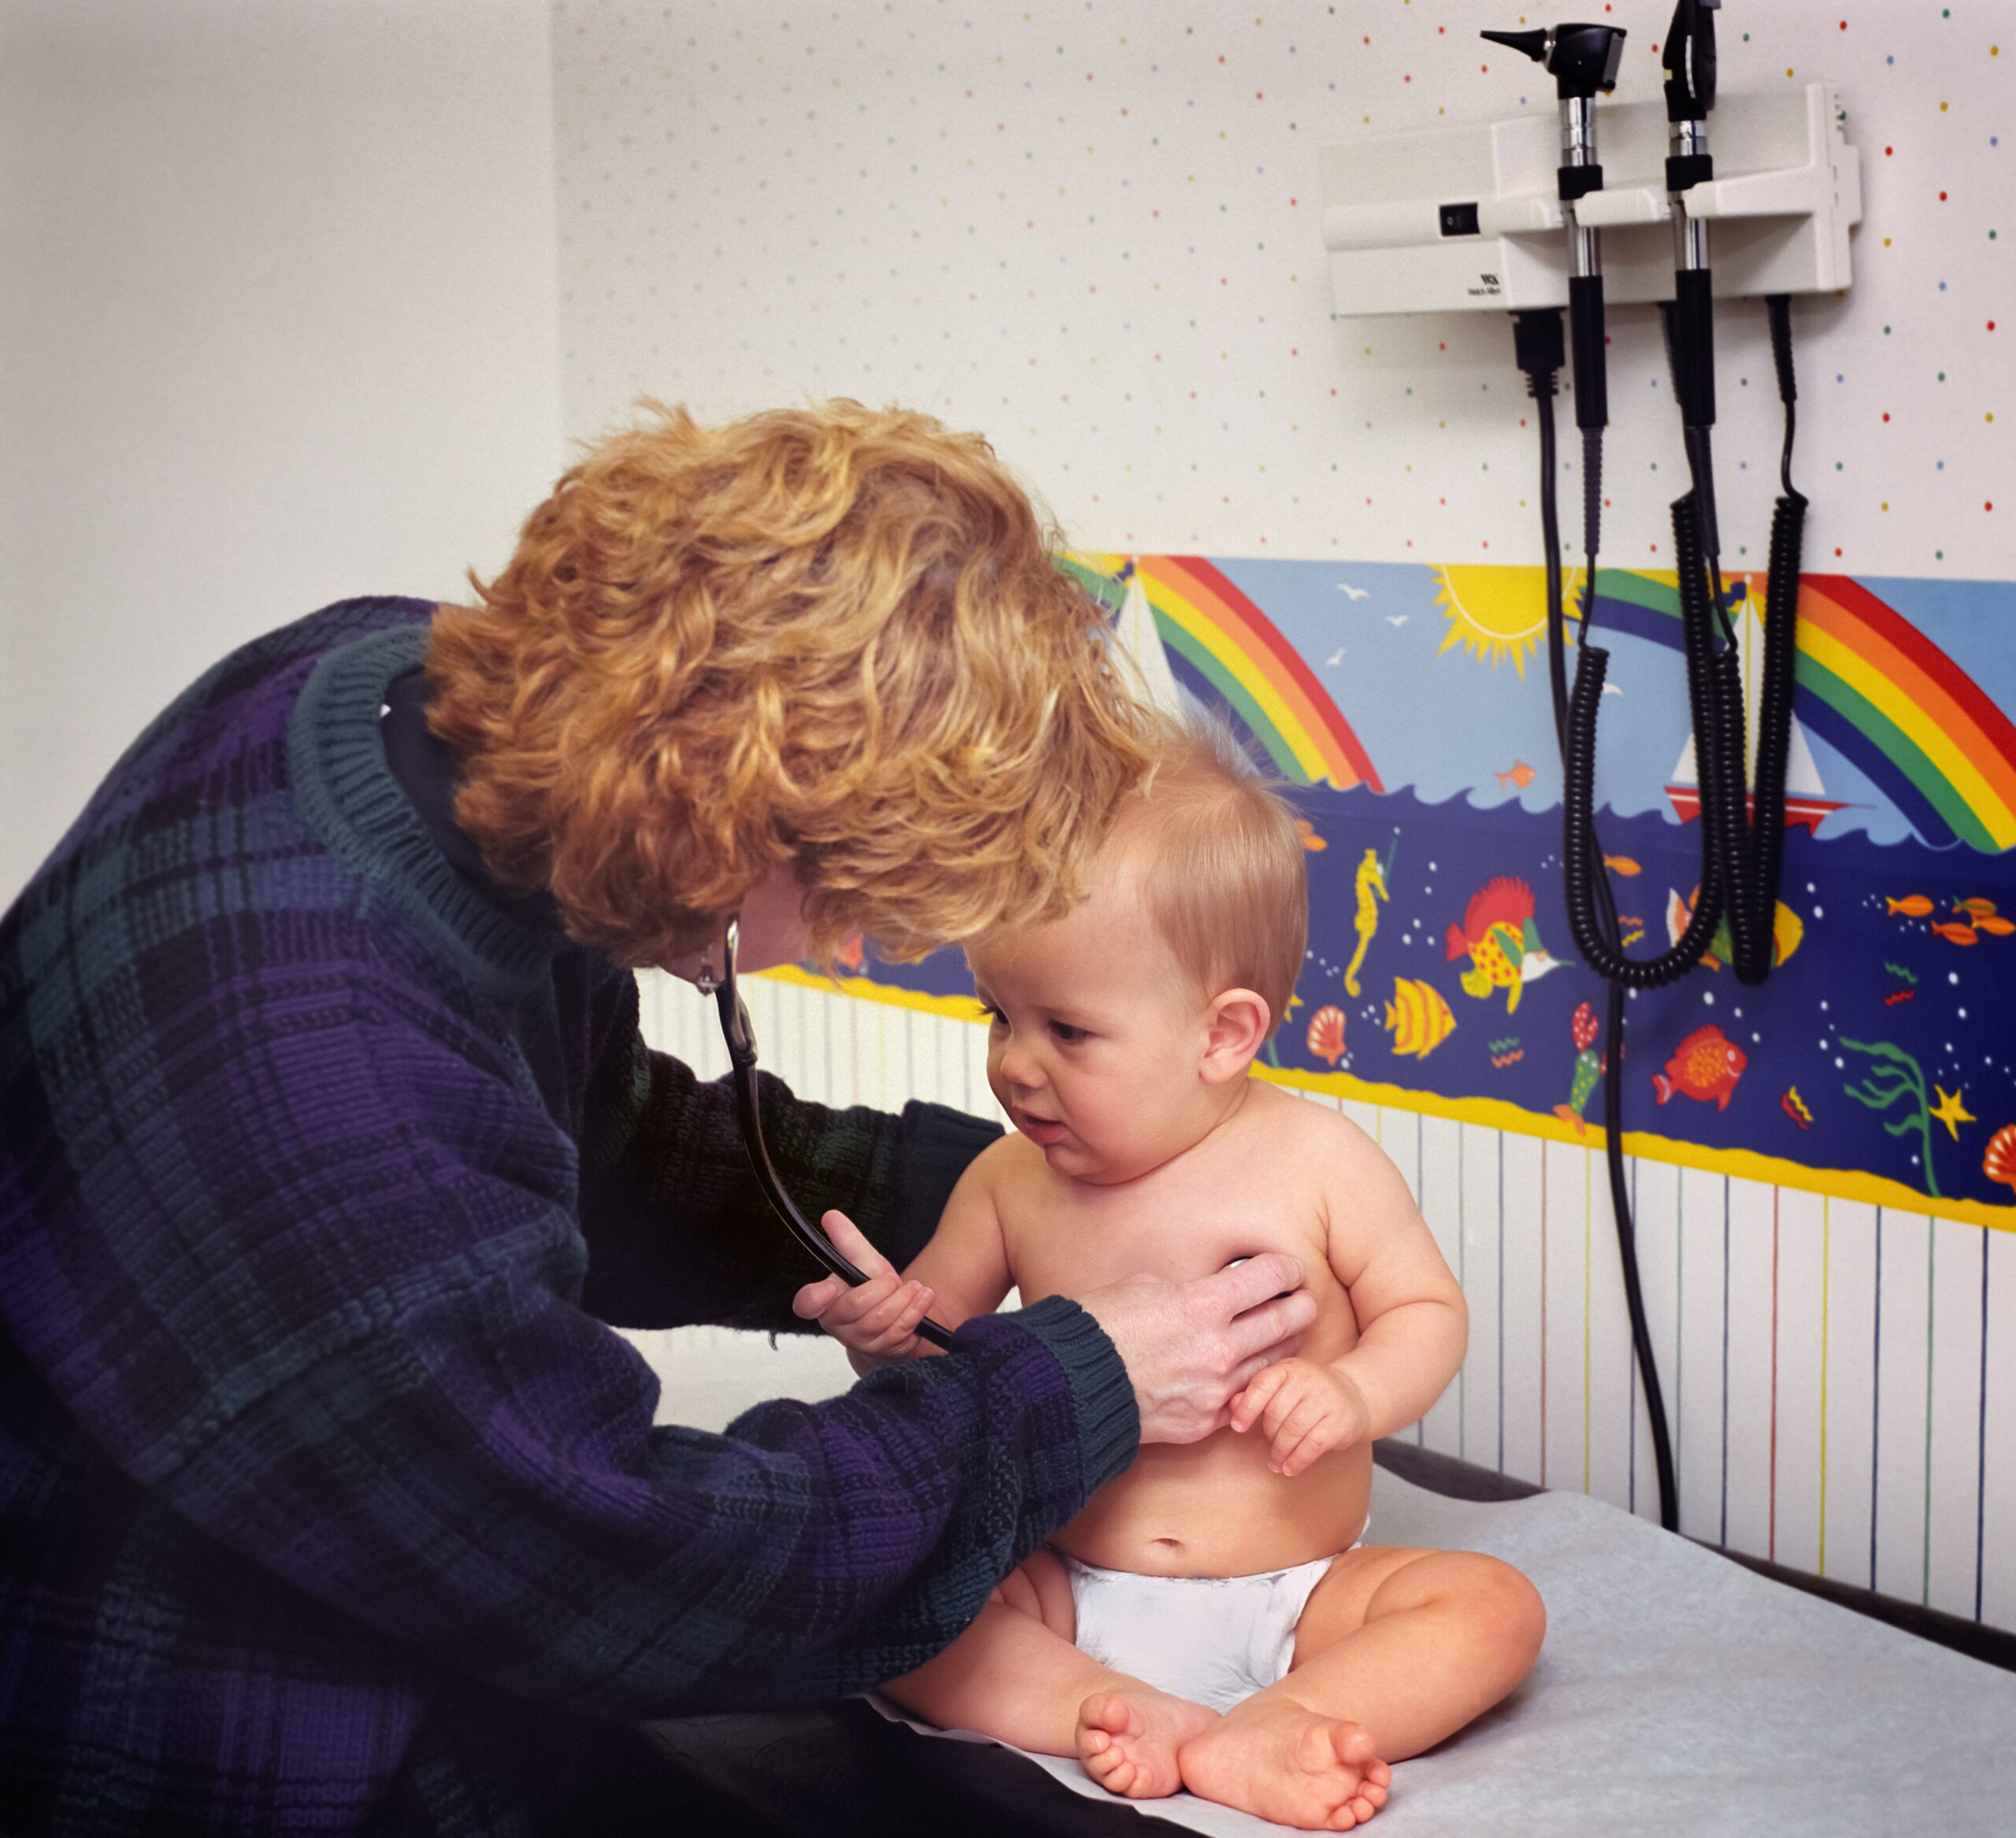 A doctor checks a newborn for common orthopedic injuries